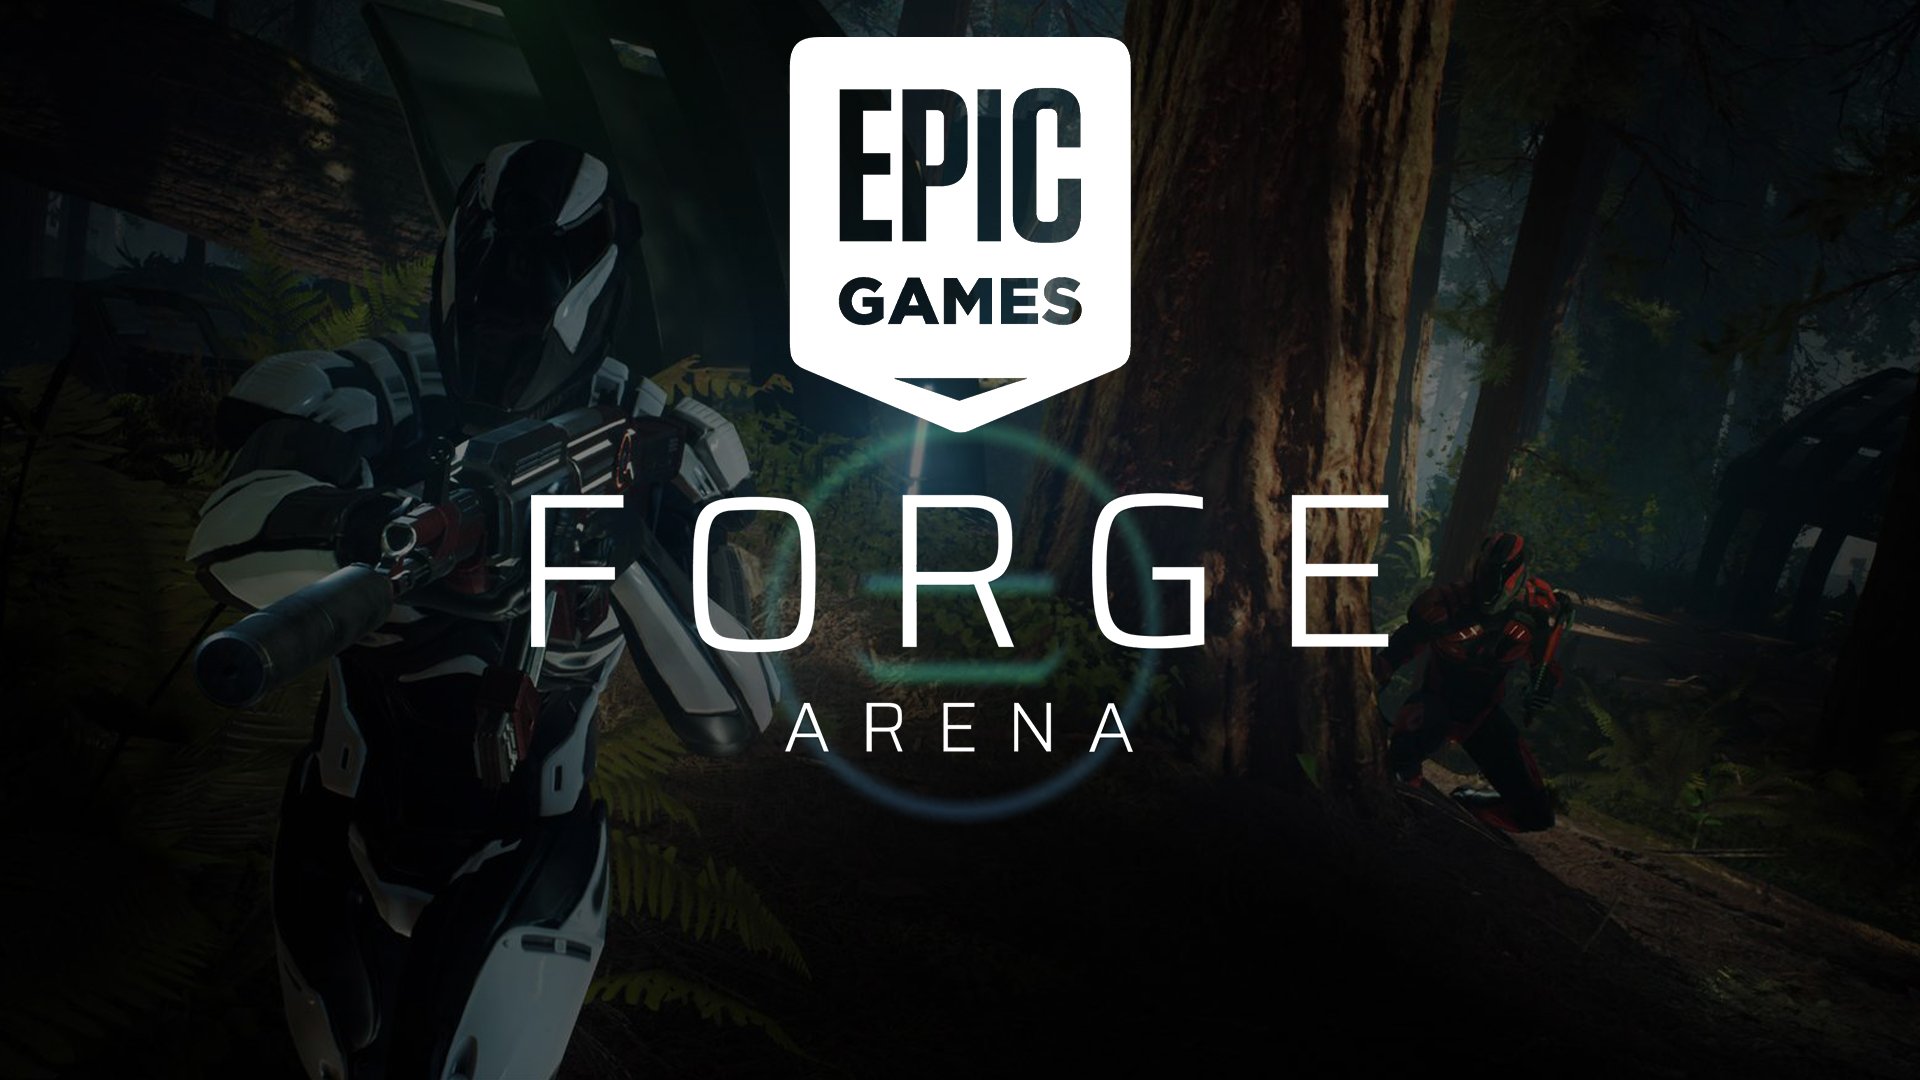 epic games partnership with forge arena